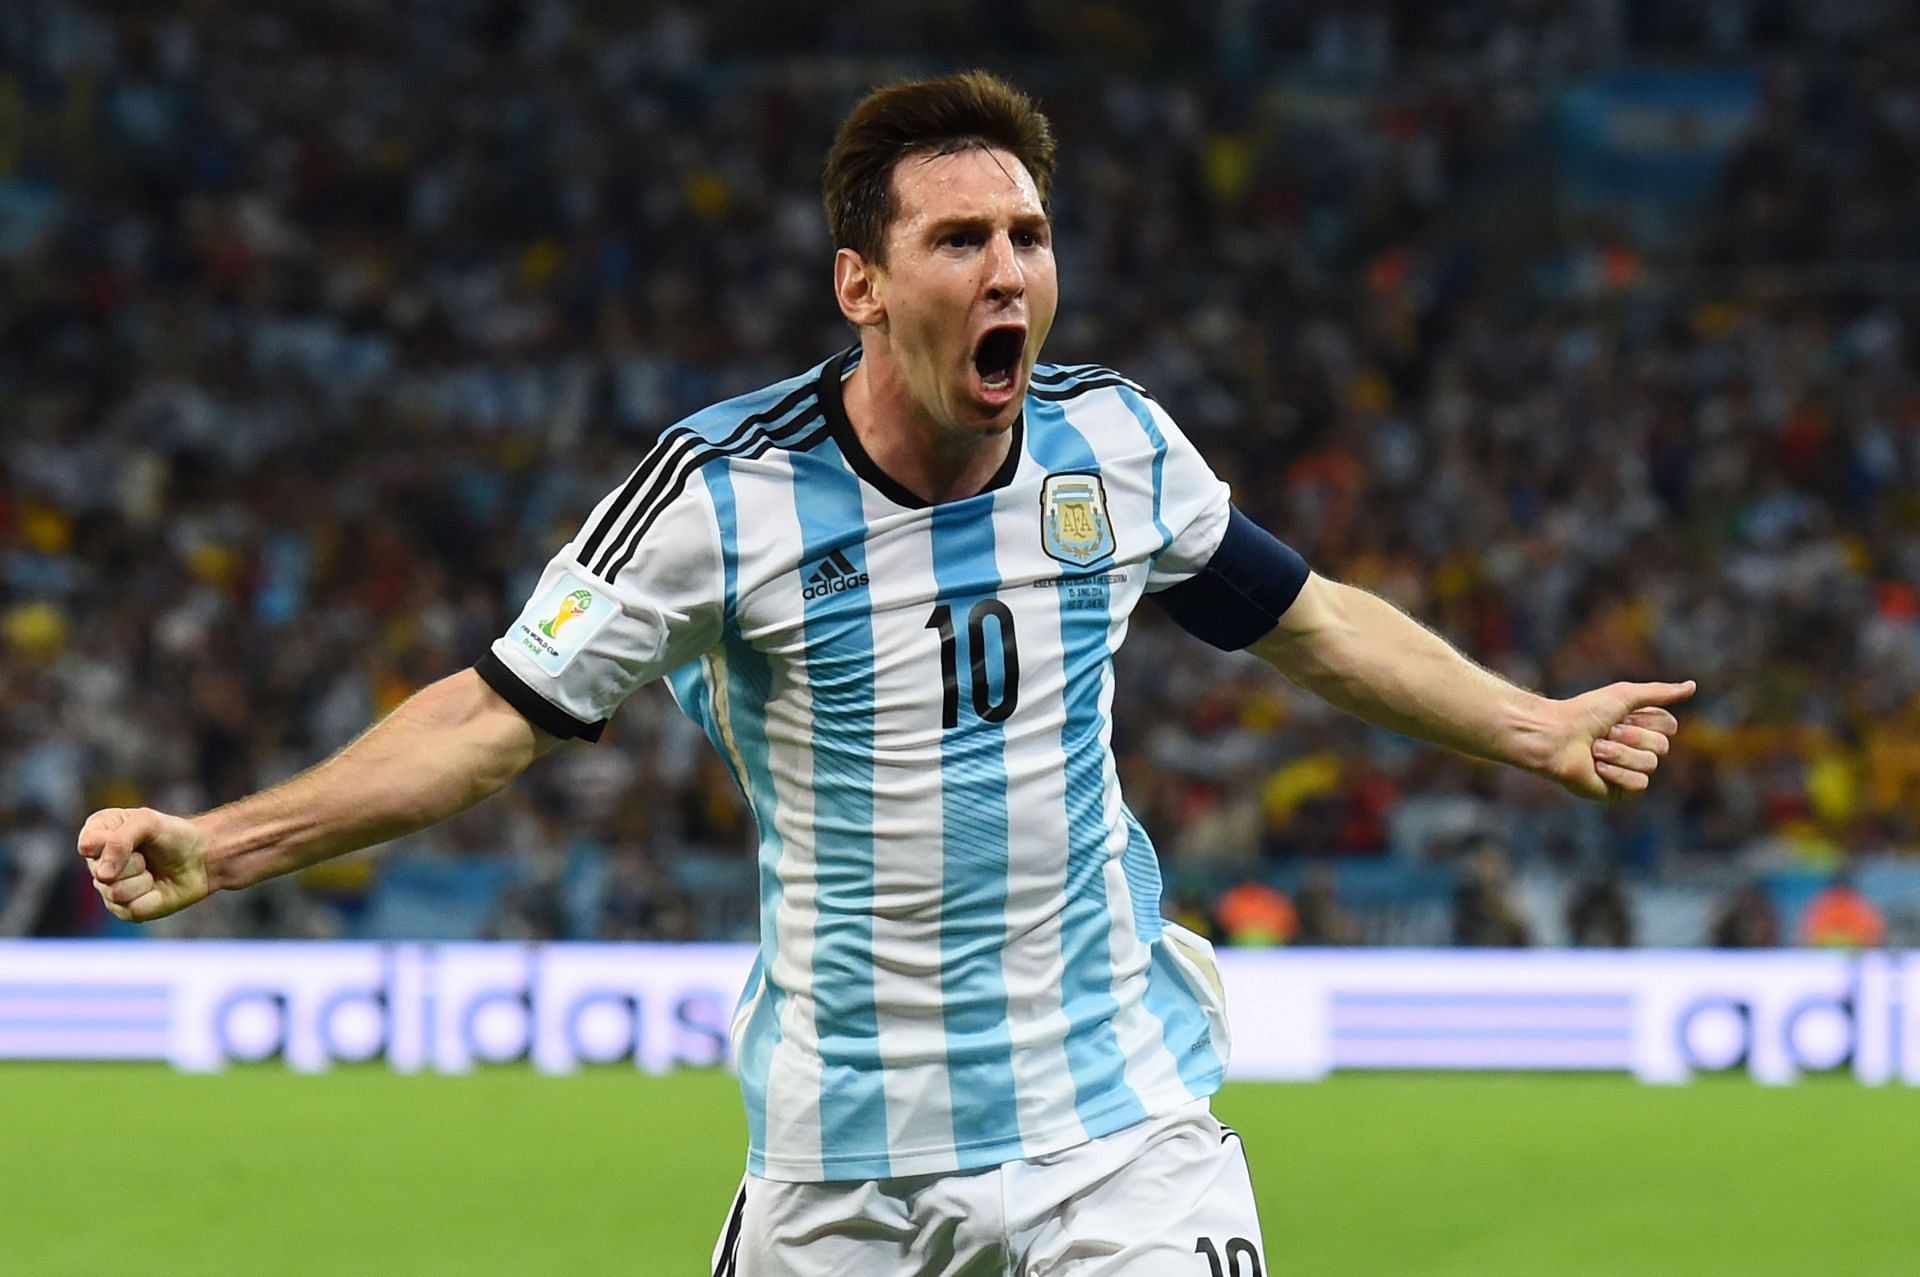 Argentina went all the way to the World Cup finals in 2014